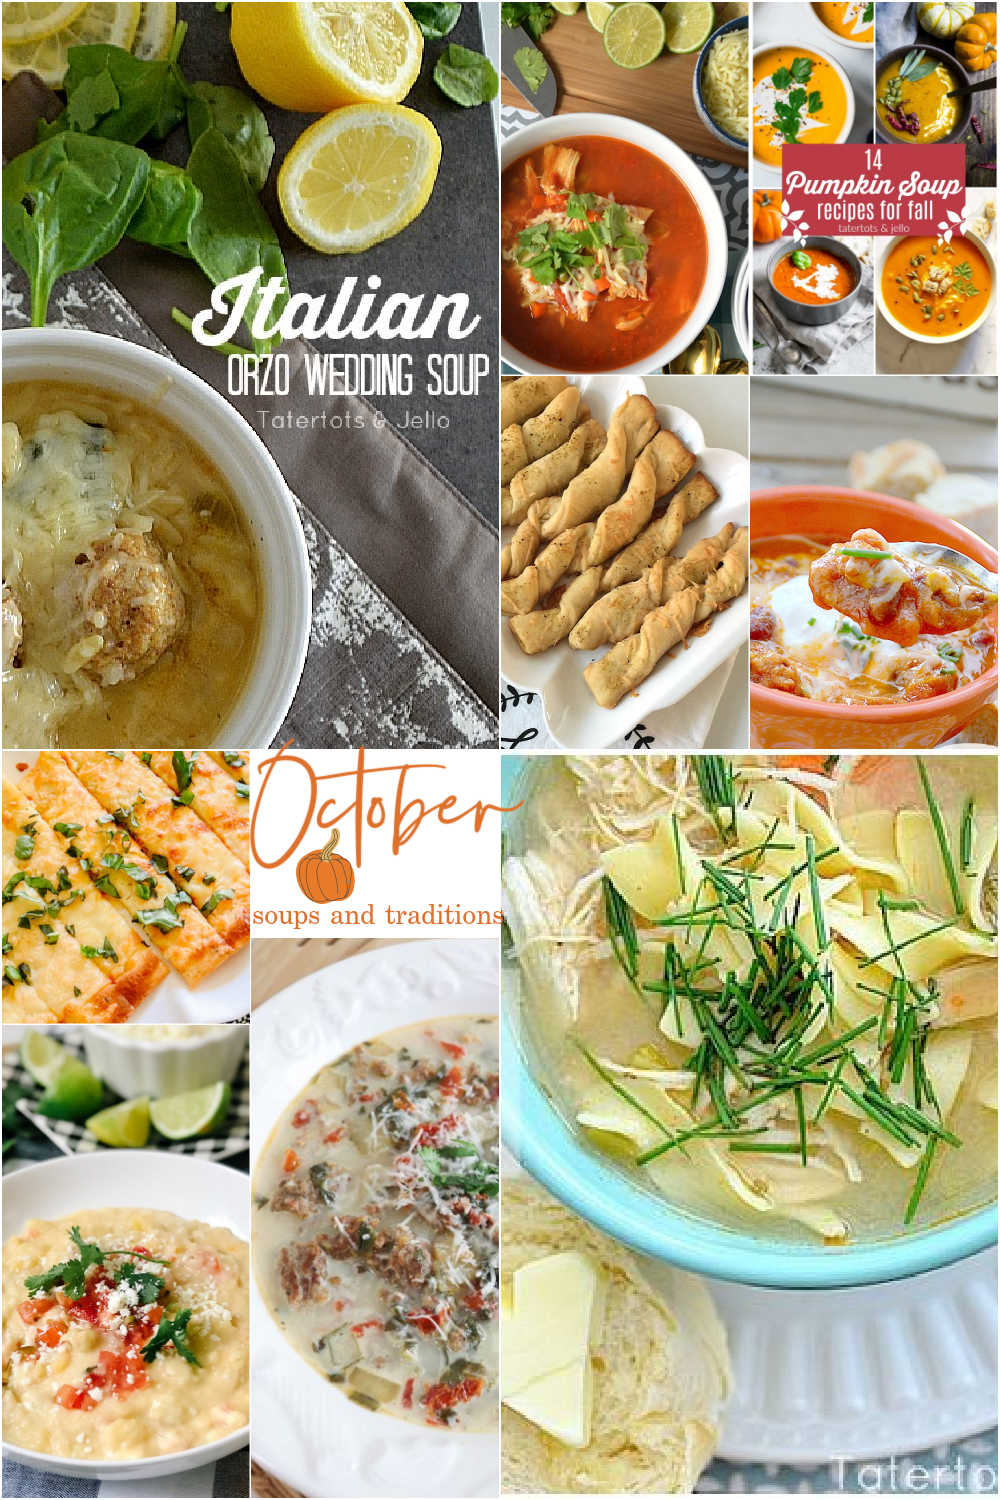 October Soups and Traditions. Some delightful October ideas that will warm your soul and create lasting memories.